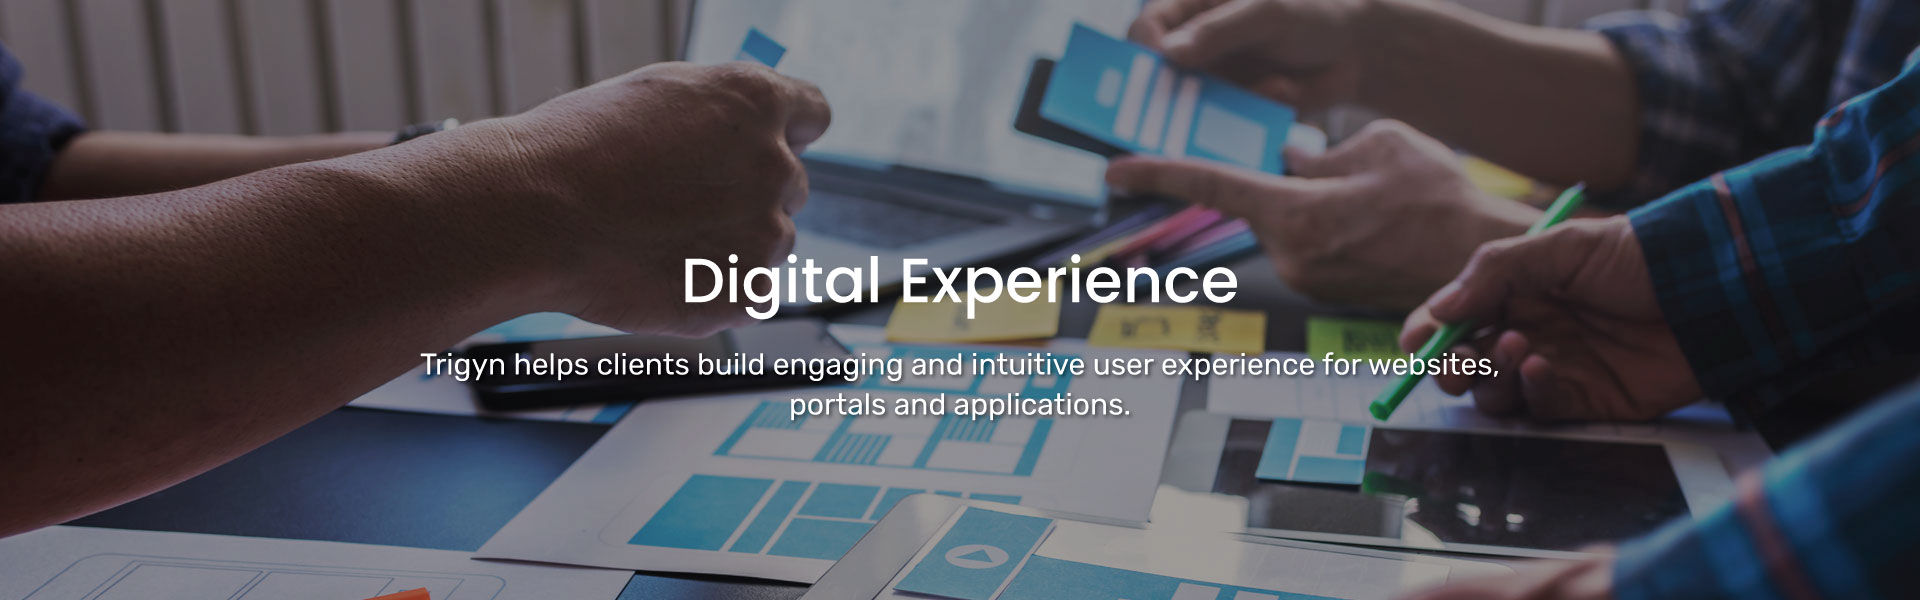 Trigyn's Digital Experience Services